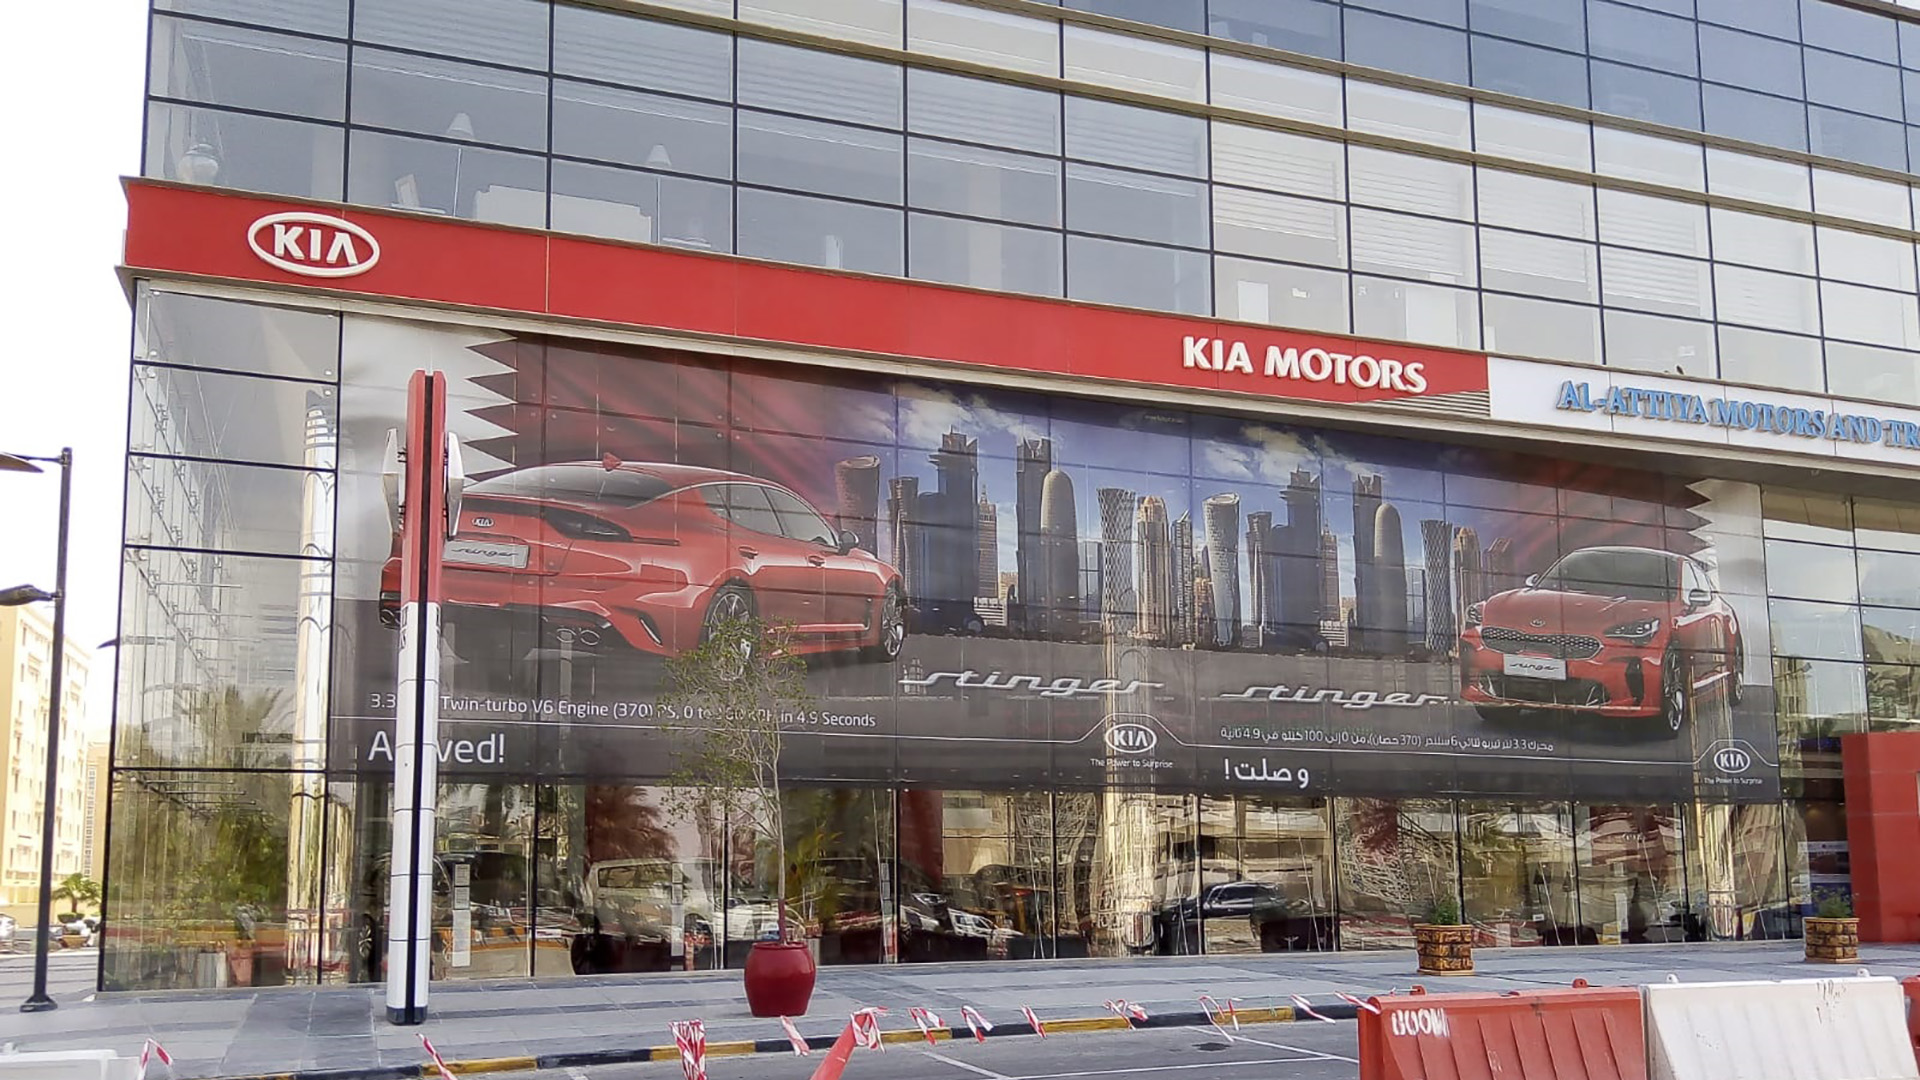 3M One Way Vision Printed Vinyl sticker for Kia produced and installed by ME Visual, Qatar